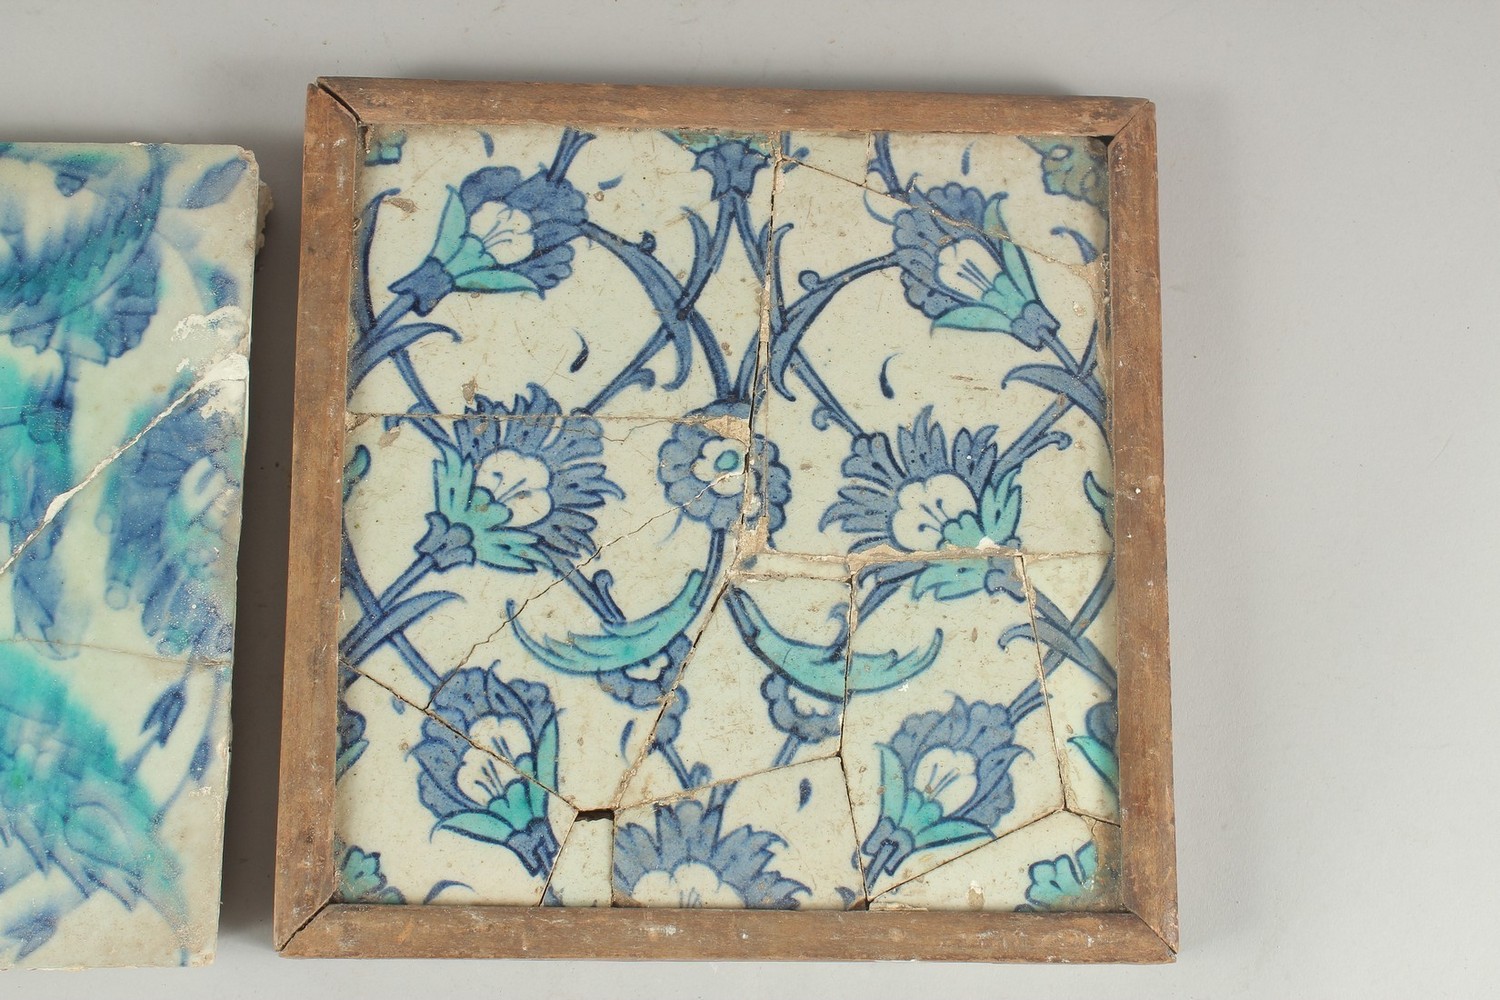 TWO EARLY 17TH CENTURY OTTOMAN IZNIK BLUE AND WHITE GLAZED POTTERY TILES, each approx. 25cm - Image 3 of 4